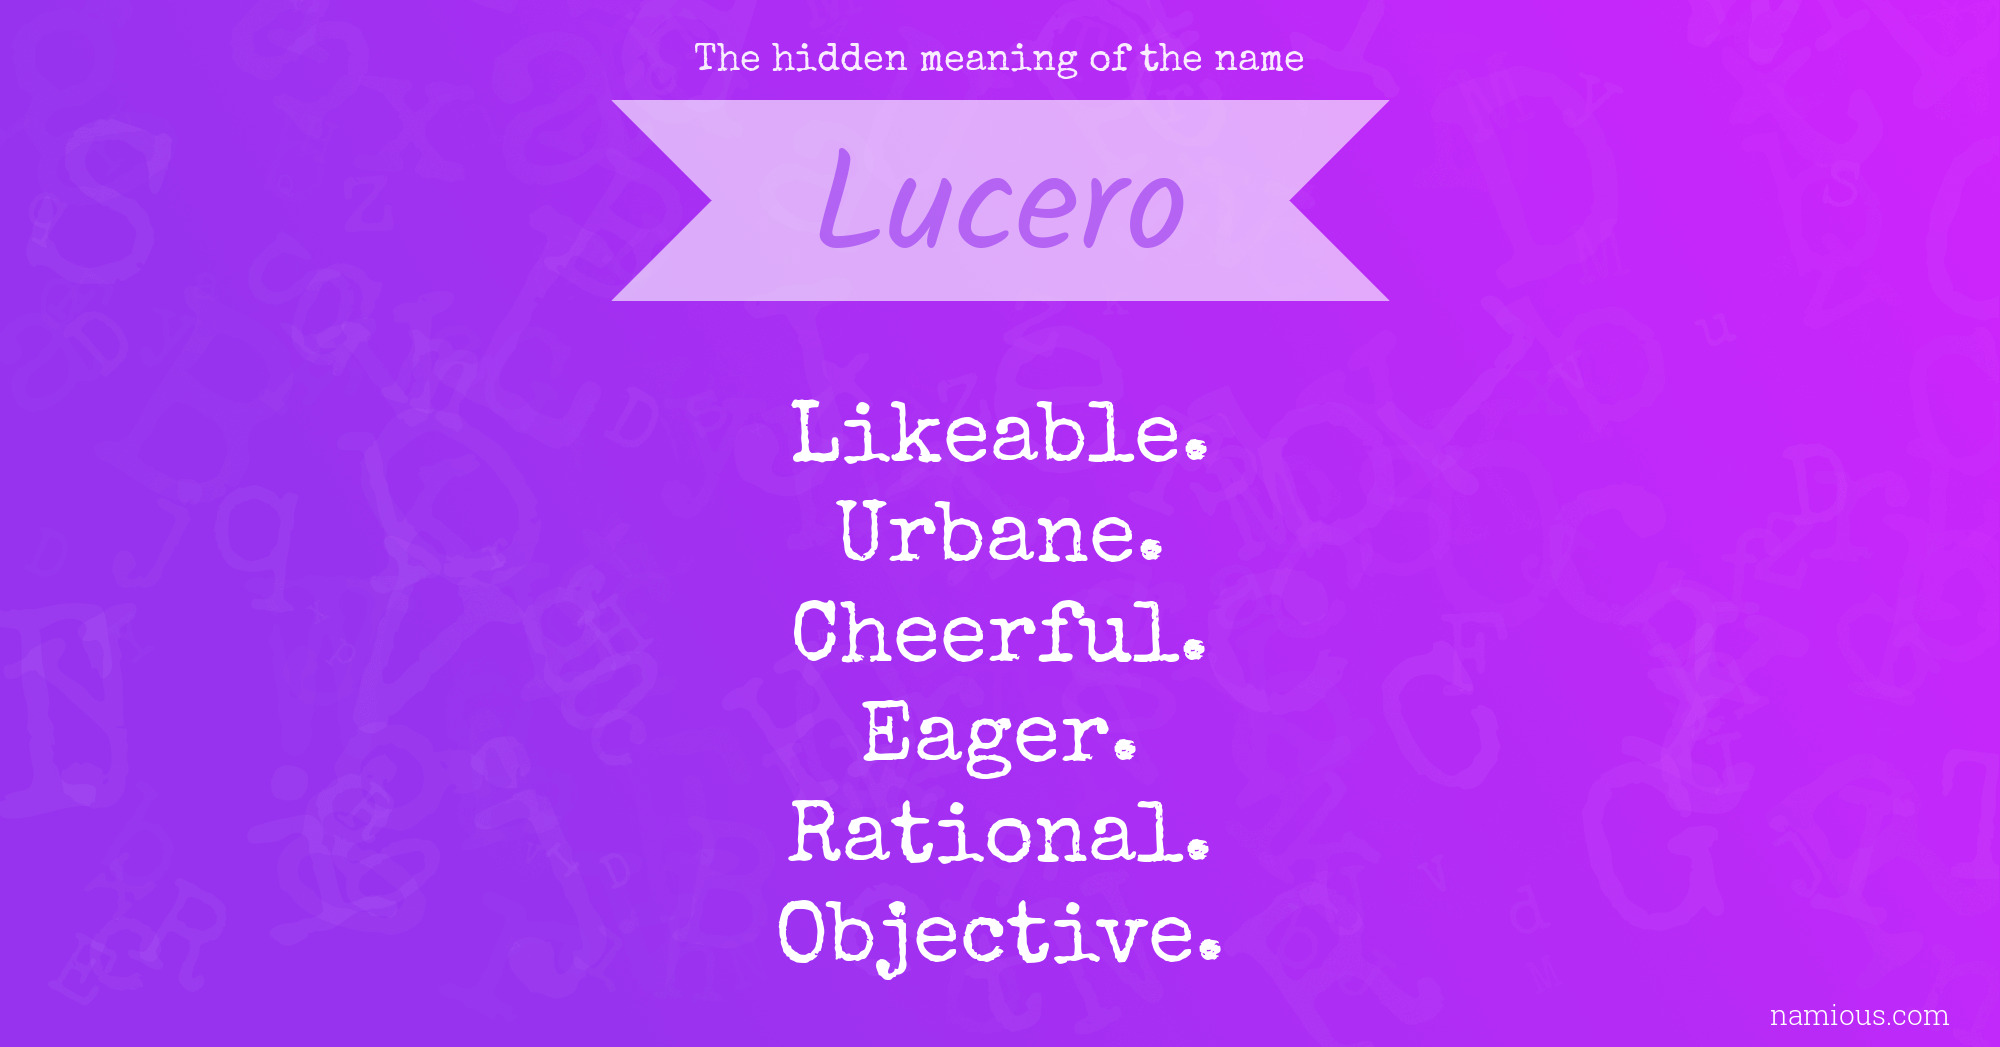 The hidden meaning of the name Lucero